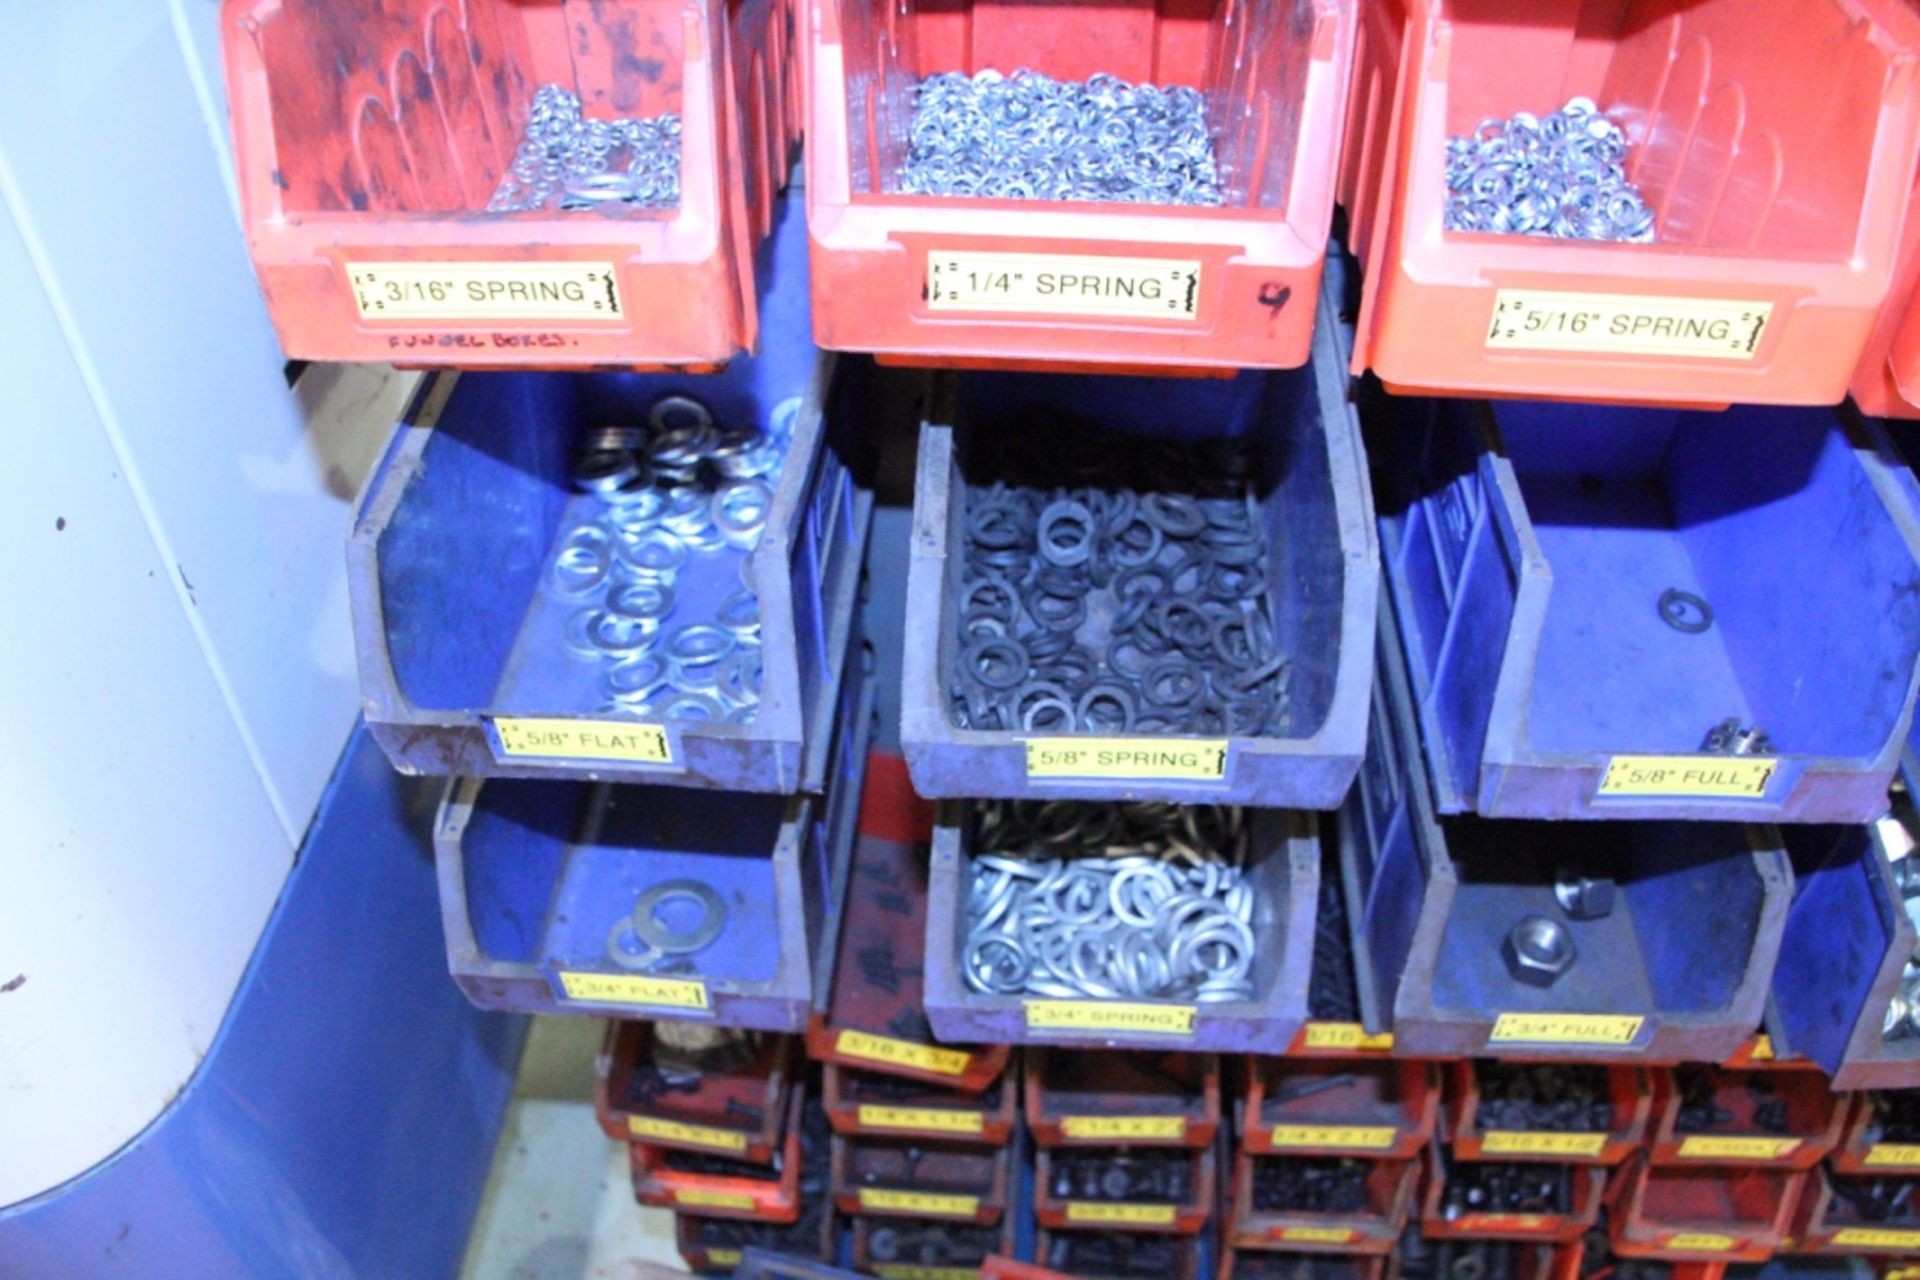 Mobile Double Sided Plastic Bin Rack, with plastic bins and contents including grub screws, cotters, - Image 12 of 25